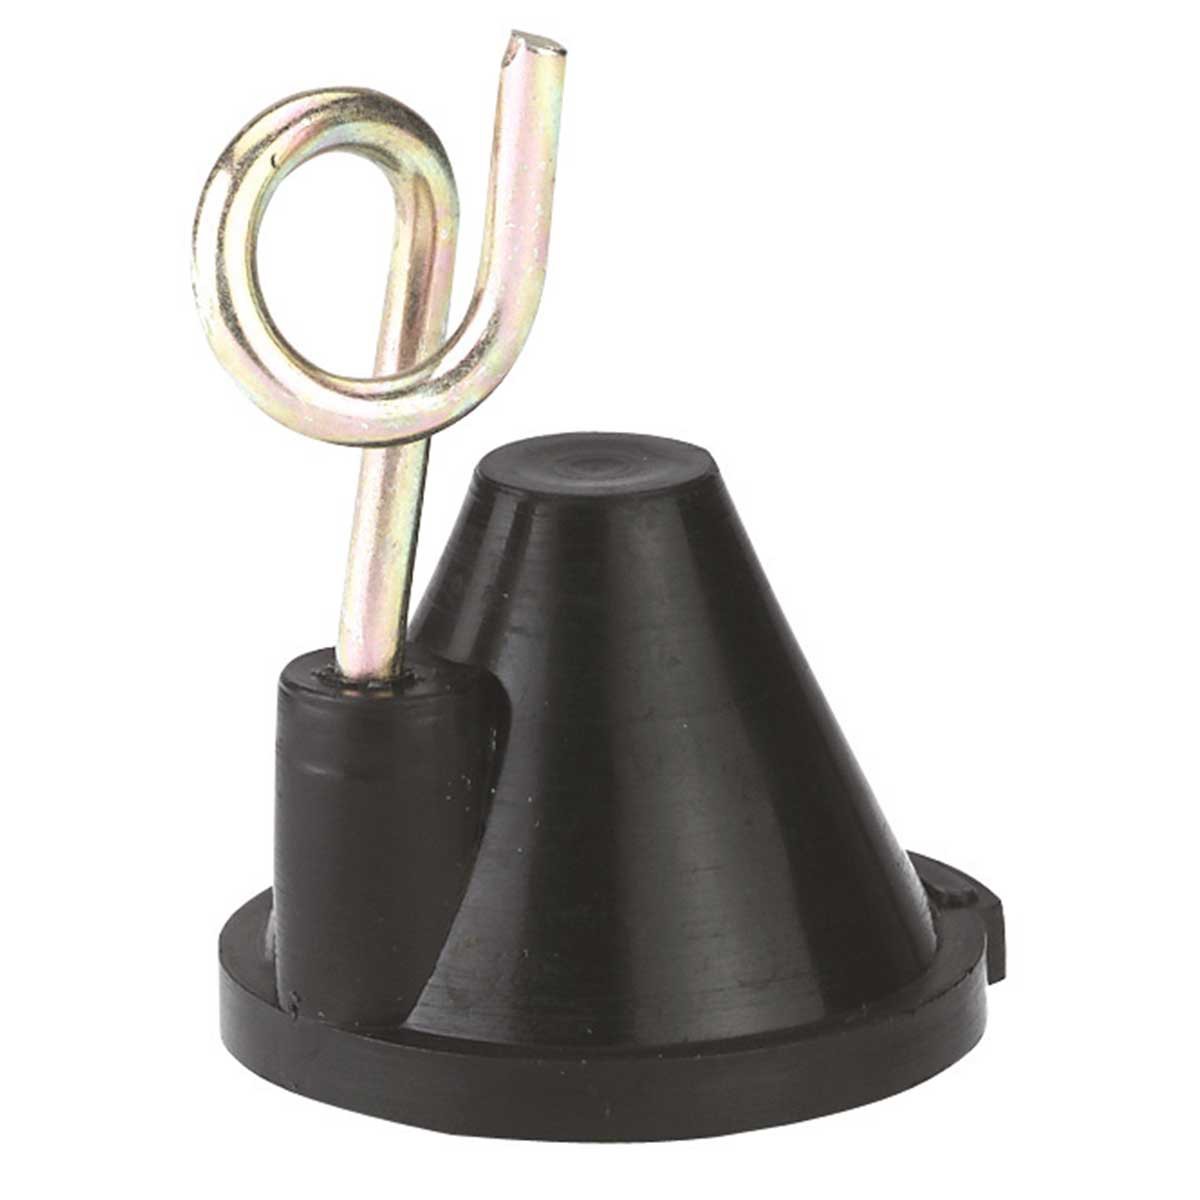 Spare top insulator with eye for oval steel post